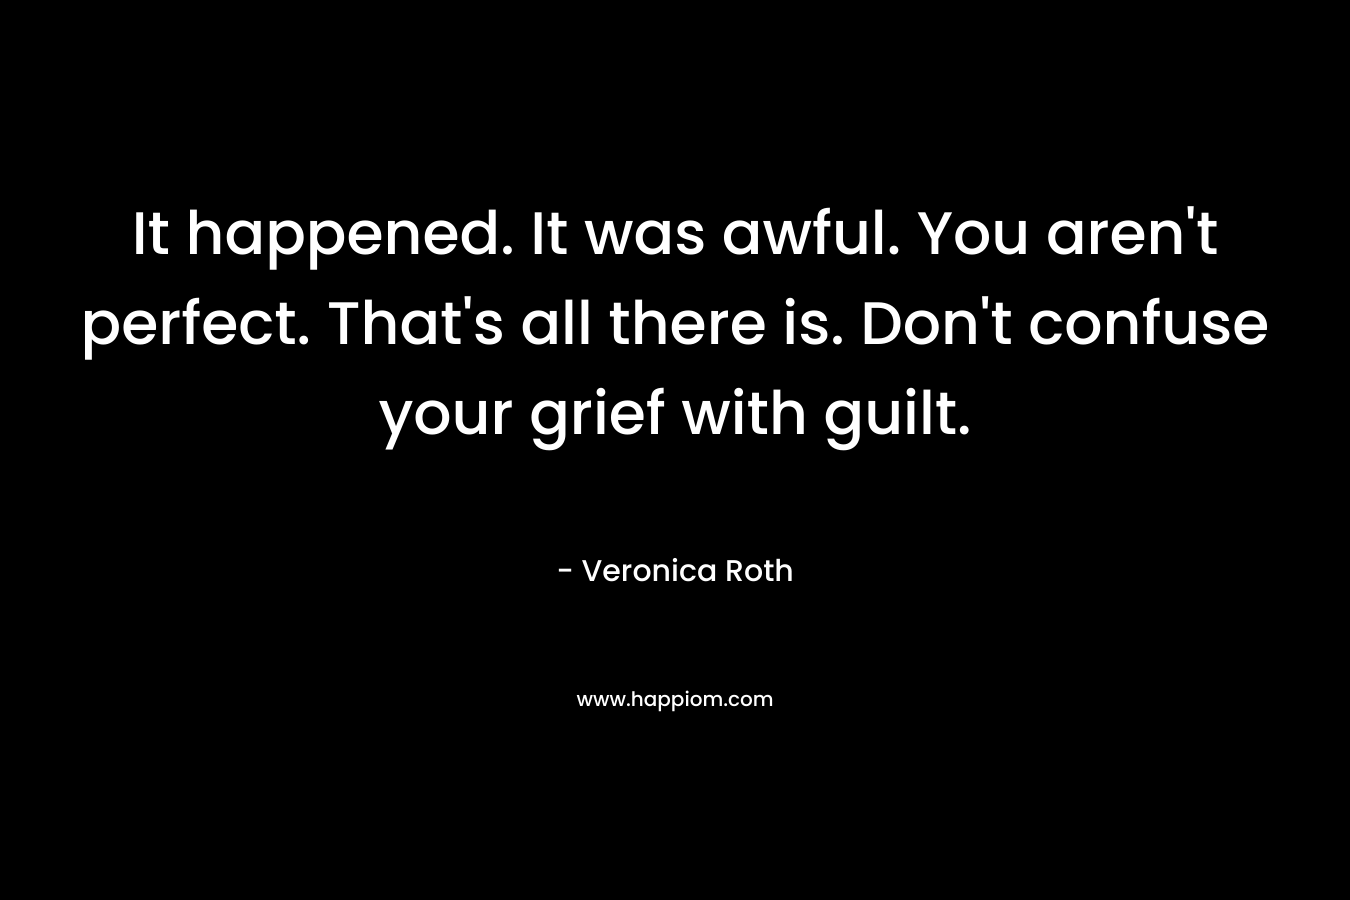 It happened. It was awful. You aren’t perfect. That’s all there is. Don’t confuse your grief with guilt. – Veronica Roth